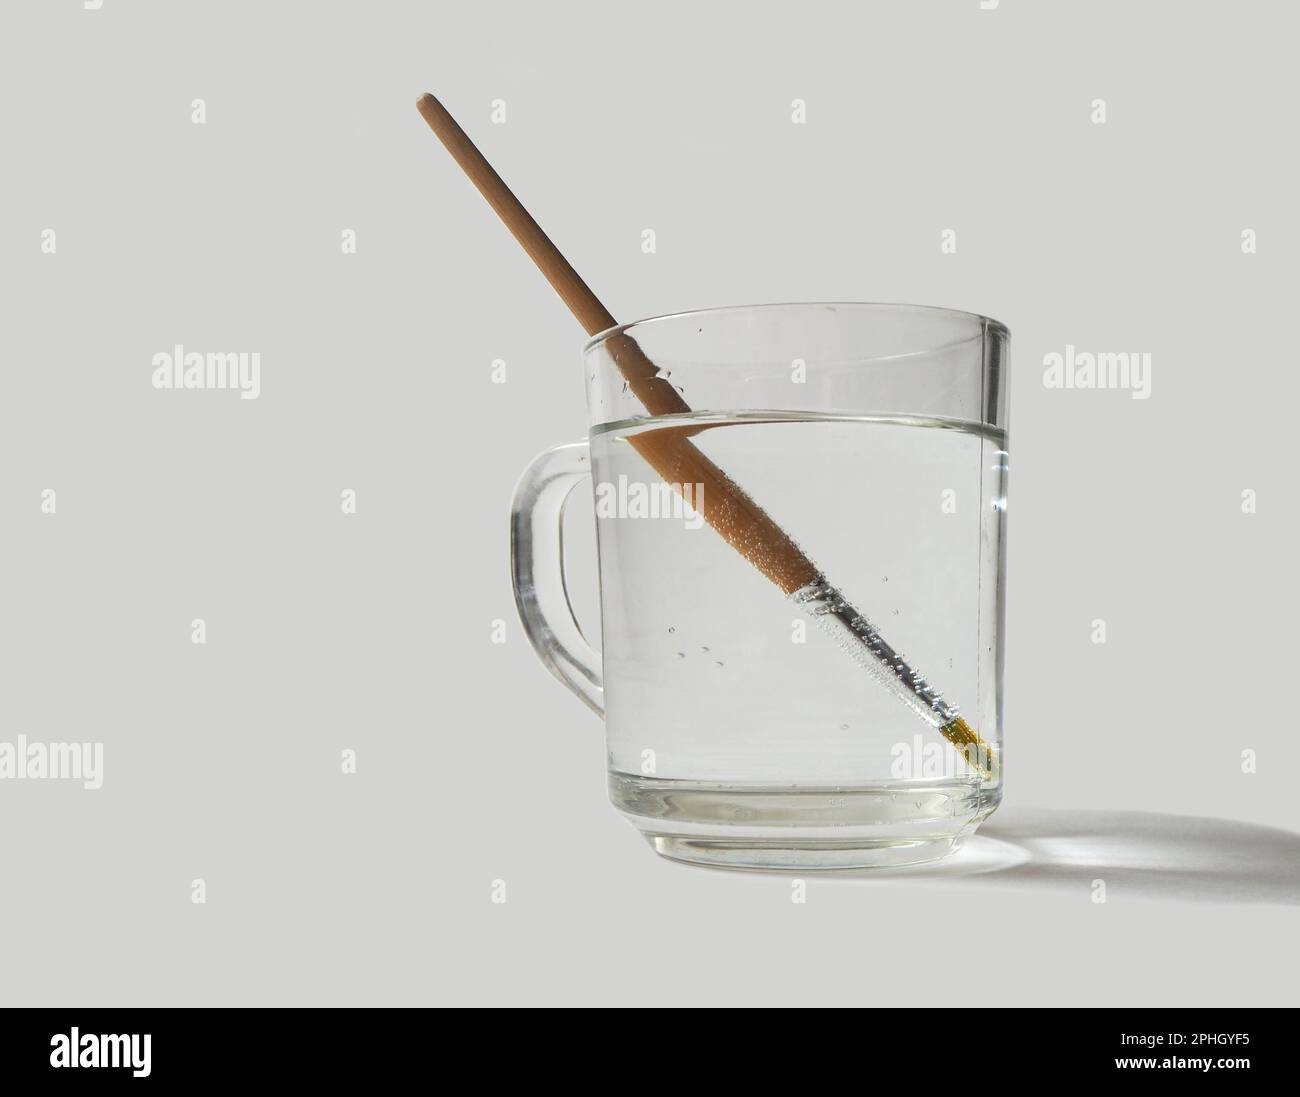 Light refraction. Refraction of light. Paint brush inside a glass of water, Stock Photo